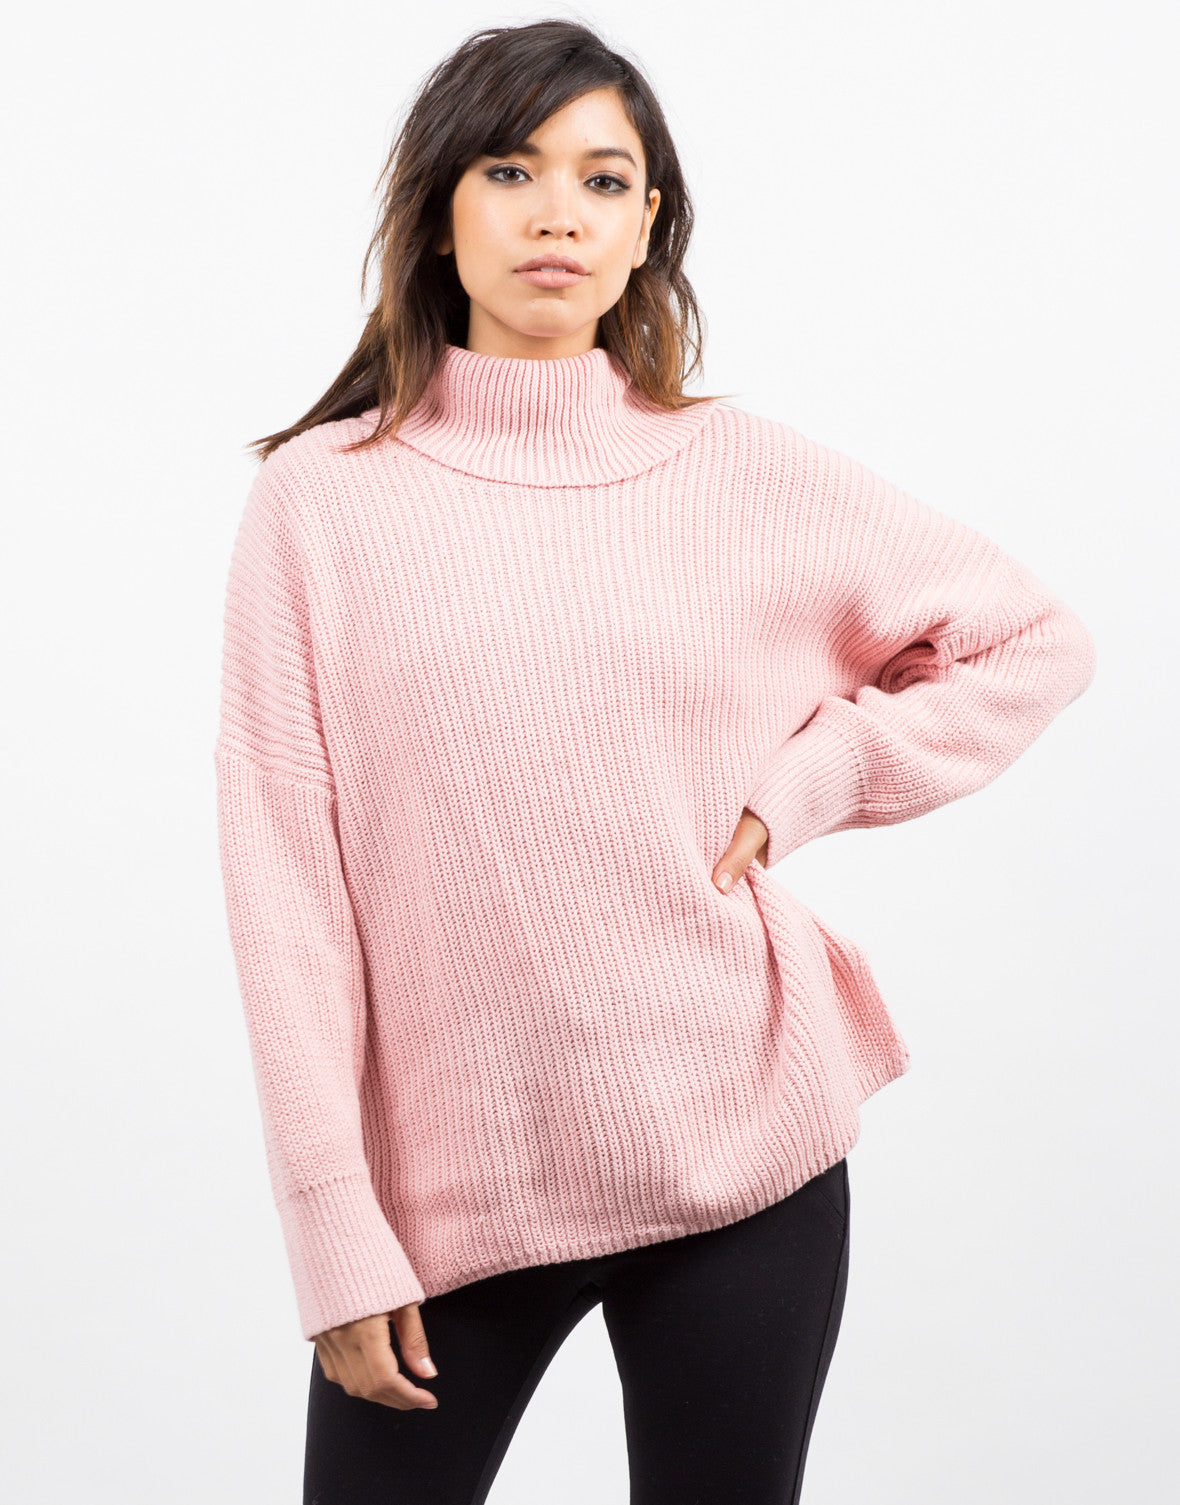  Oversized  Turtleneck Sweater  Pink Top Knit Sweater  